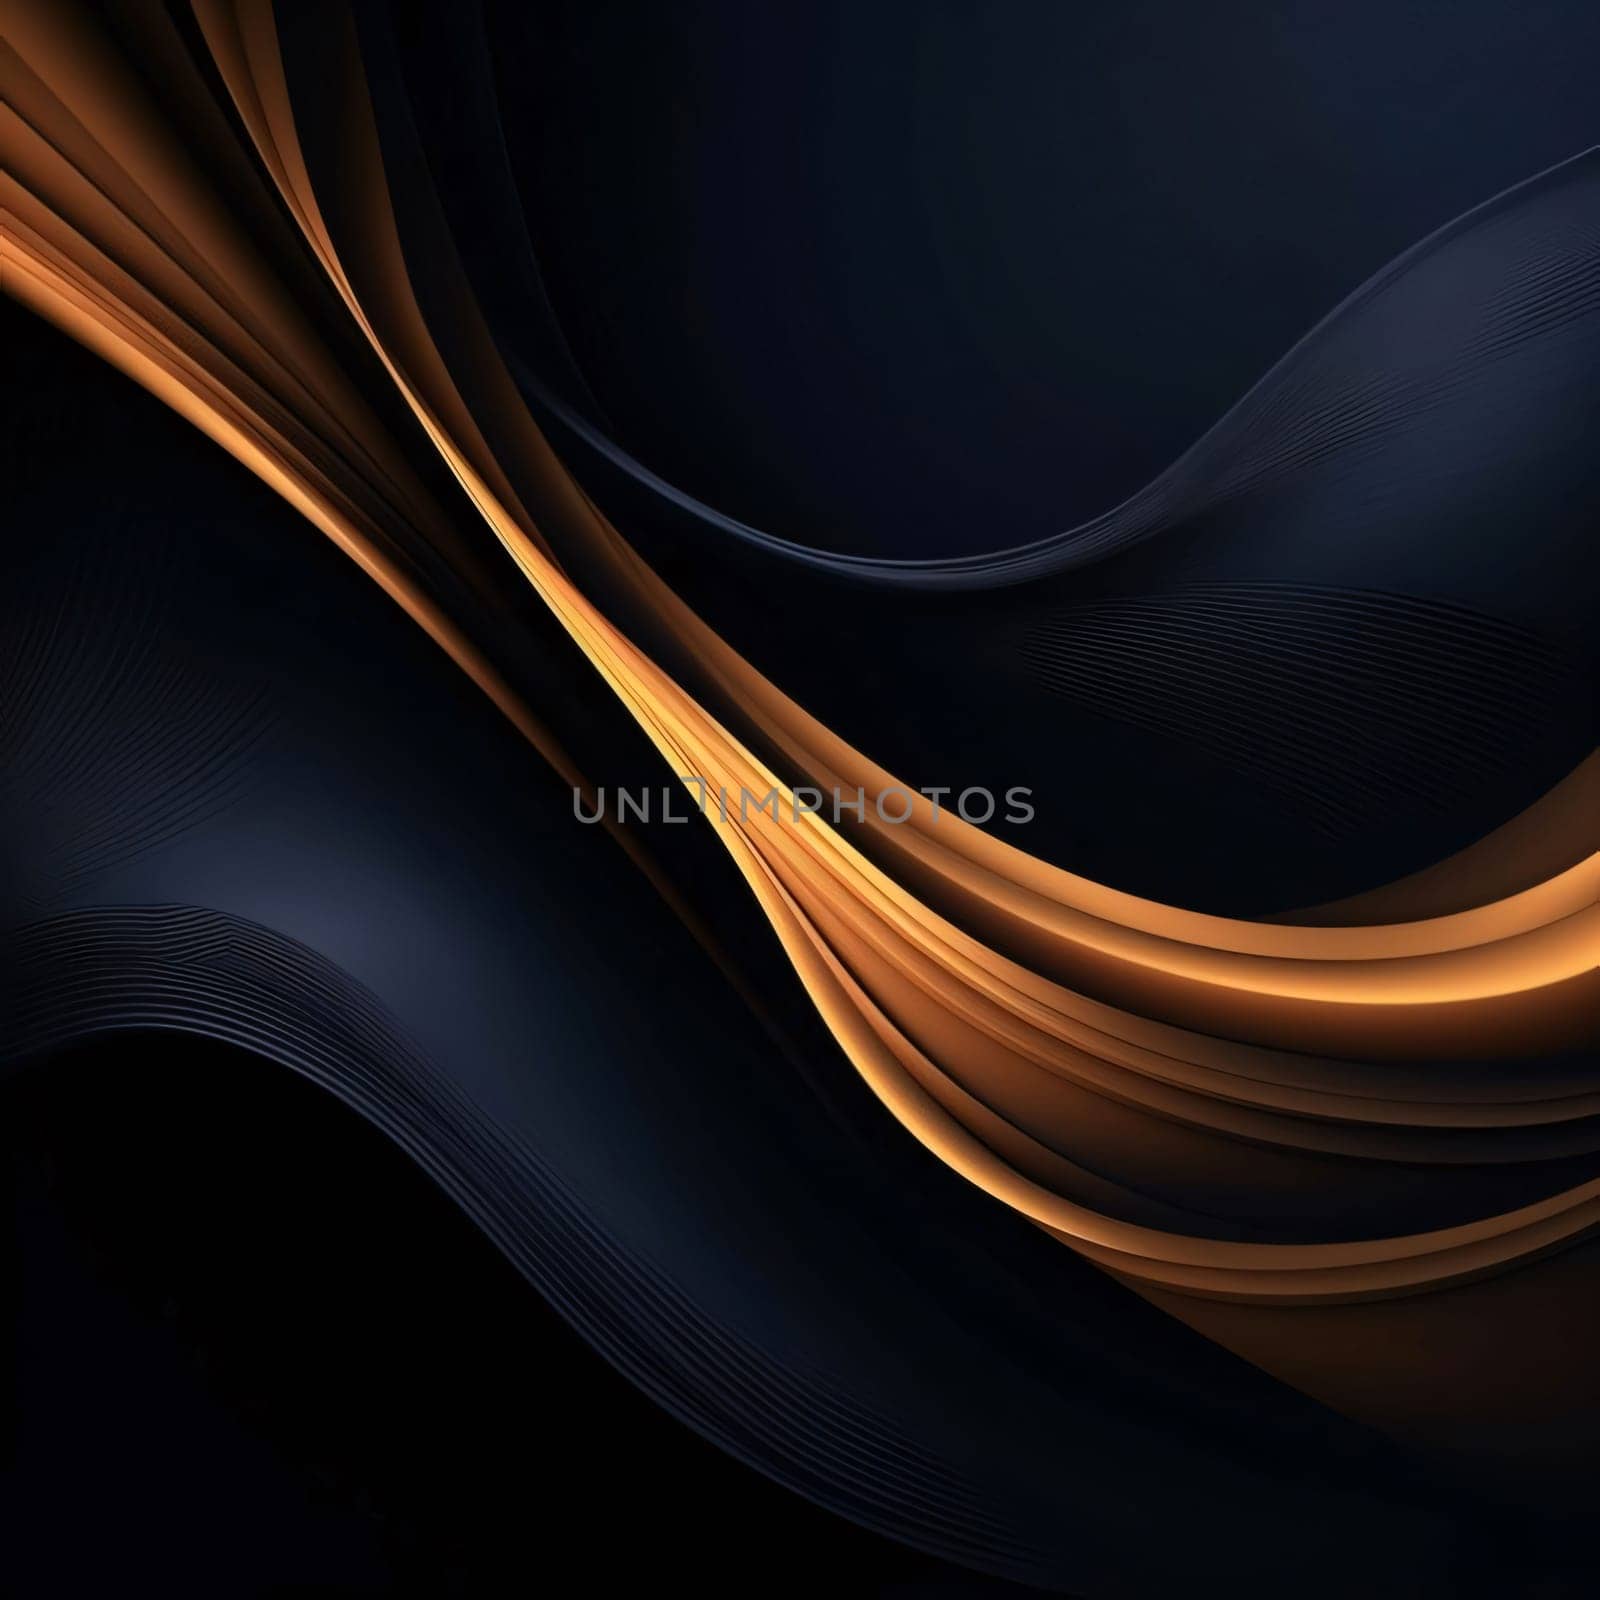 Abstract background design: abstract background with smooth wavy lines in black and orange colors